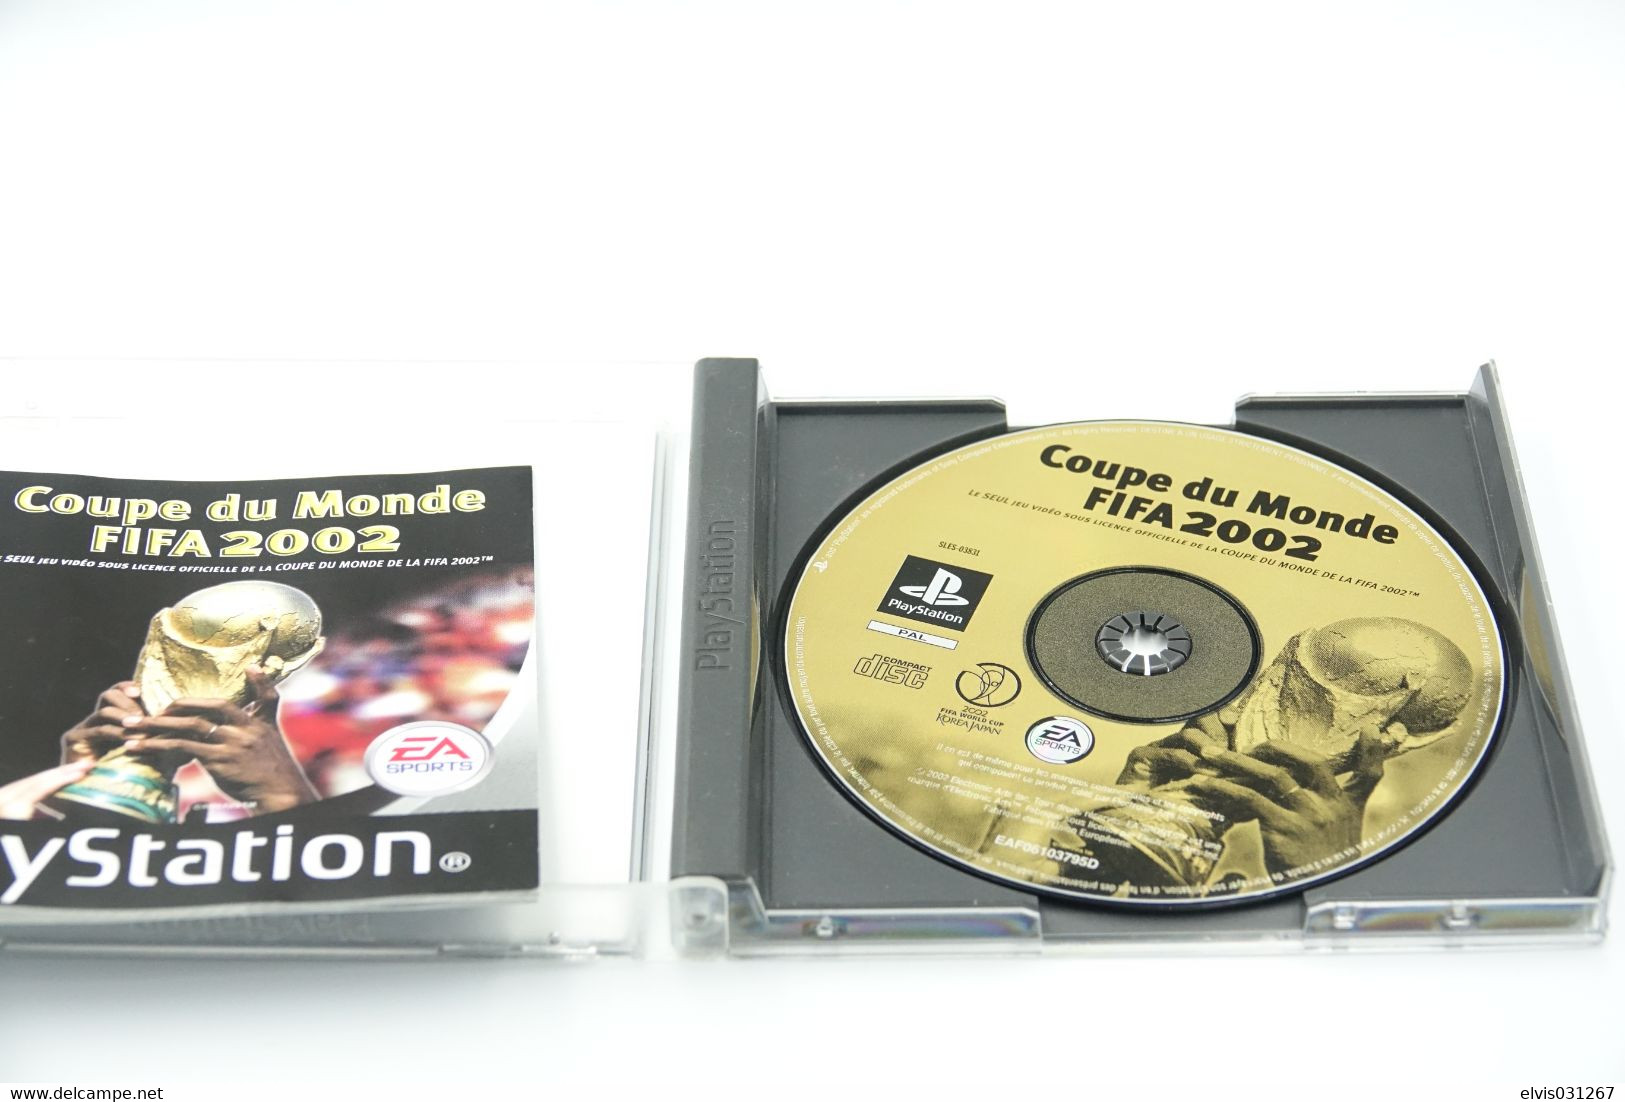 SONY PLAYSTATION ONE PS1 : FIFA FOOTBALL 2002 WORLD CUP - Playstation